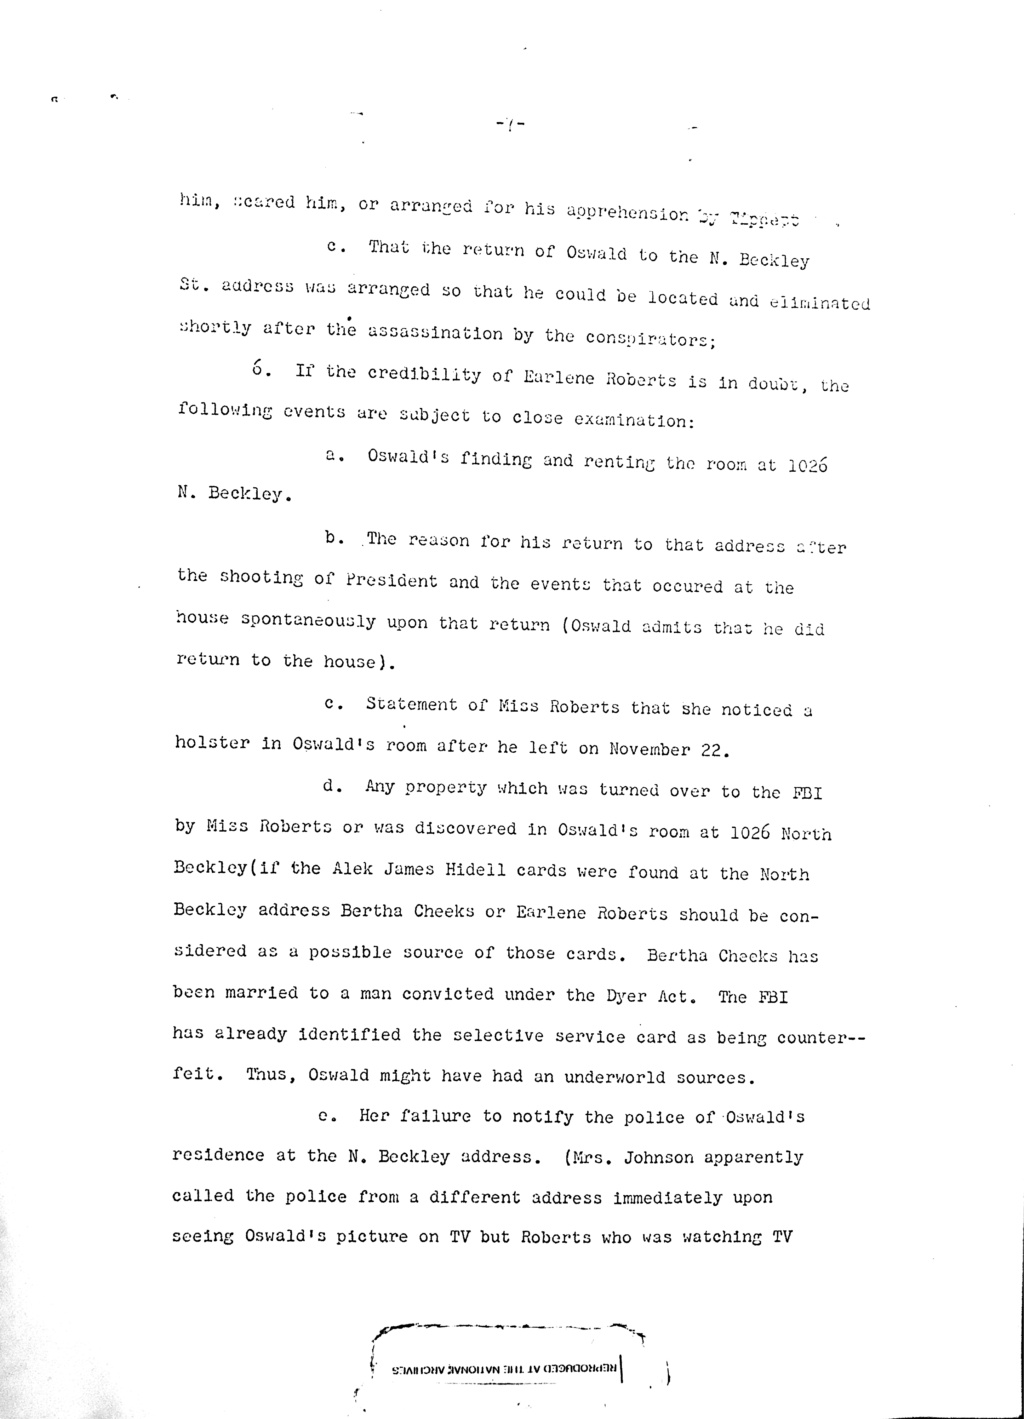 	Did Oswald deny living at 1026 N Beckley?  - Page 3 Aug_1817